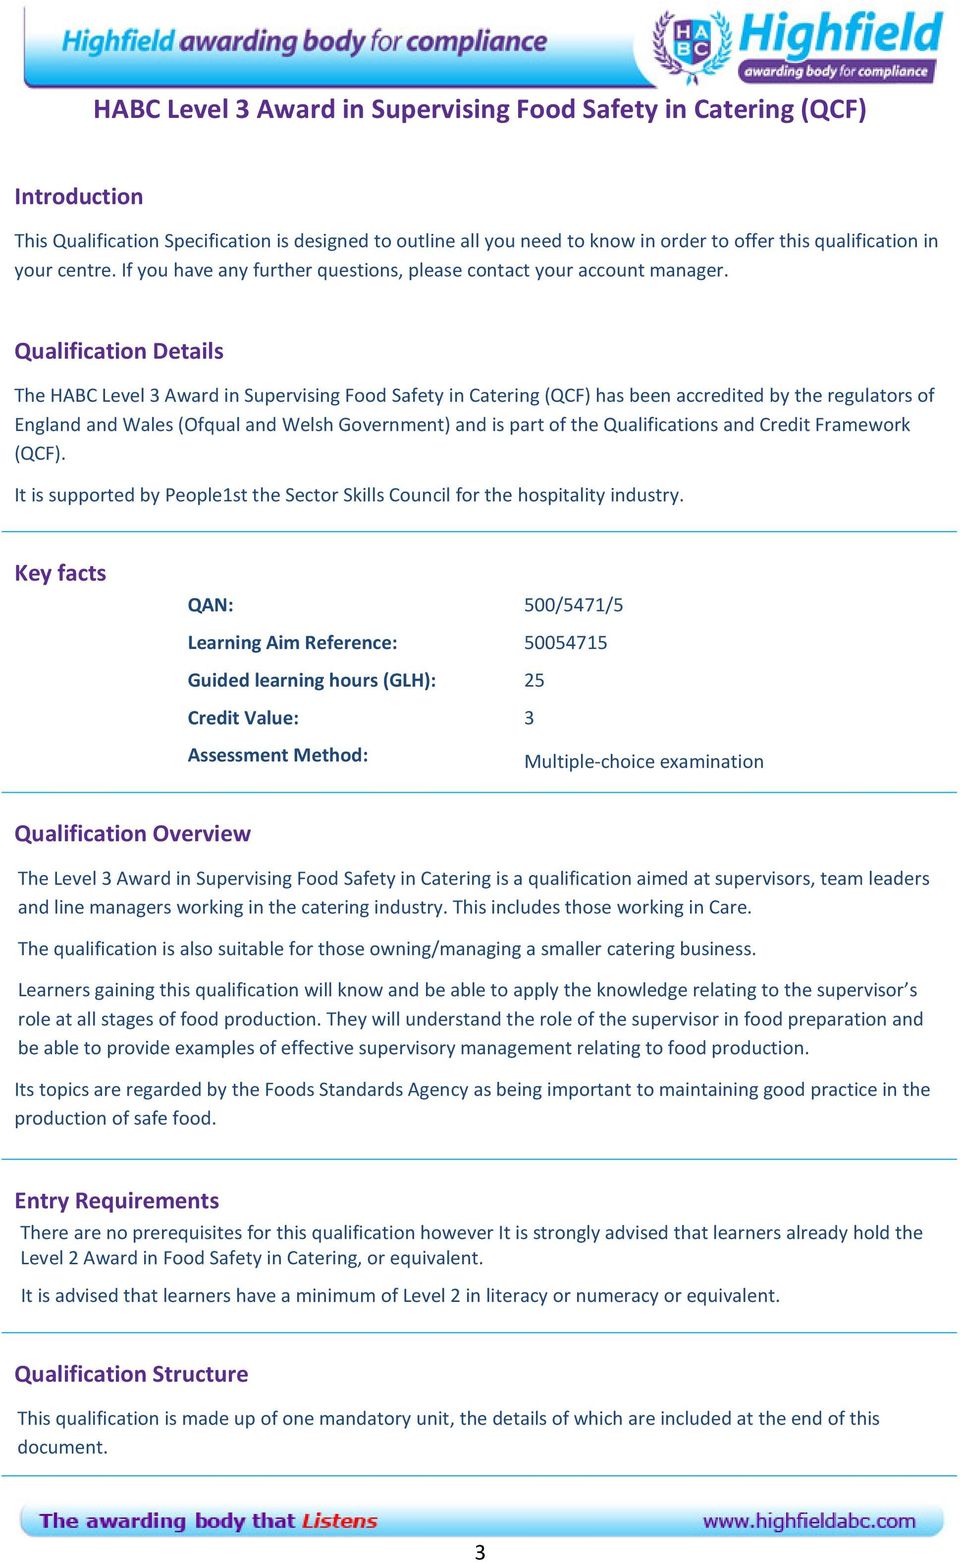 Qualification Details The HABC Level 3 Award in Supervising Food Safety in Catering (QCF) has been accredited by the regulators of England and Wales (Ofqual and Welsh Government) and is part of the